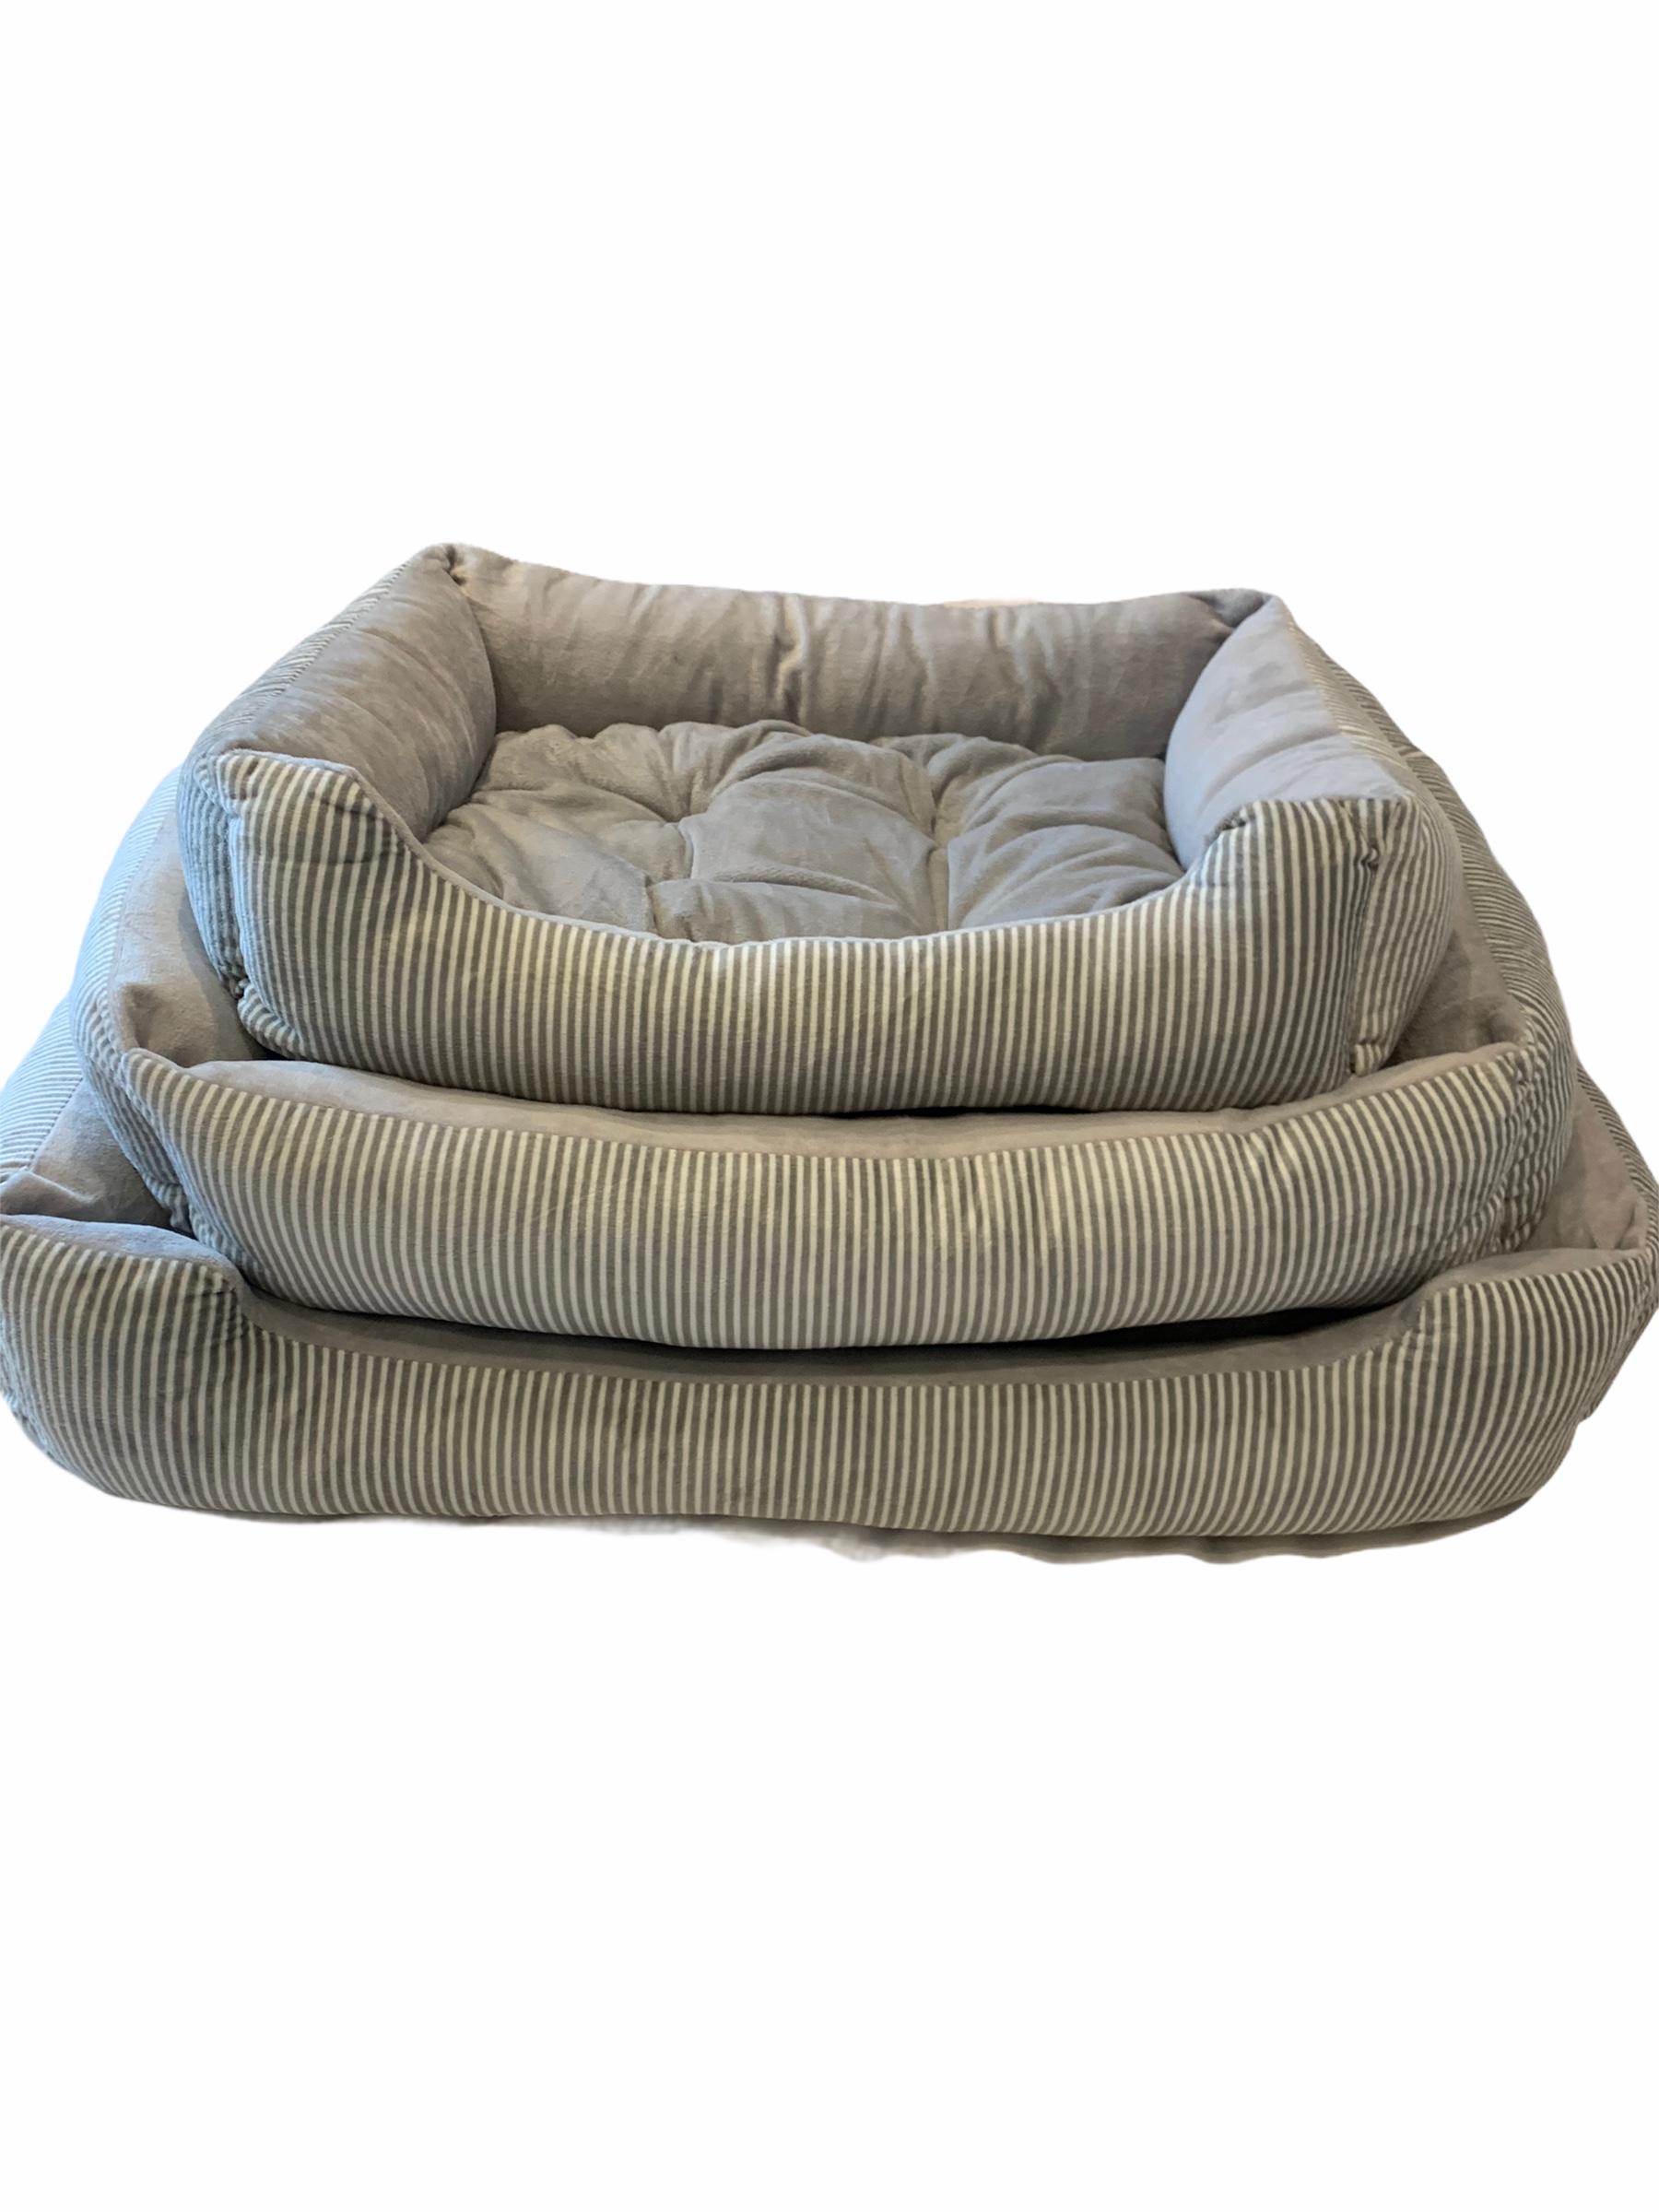 Stacked light striped dog beds